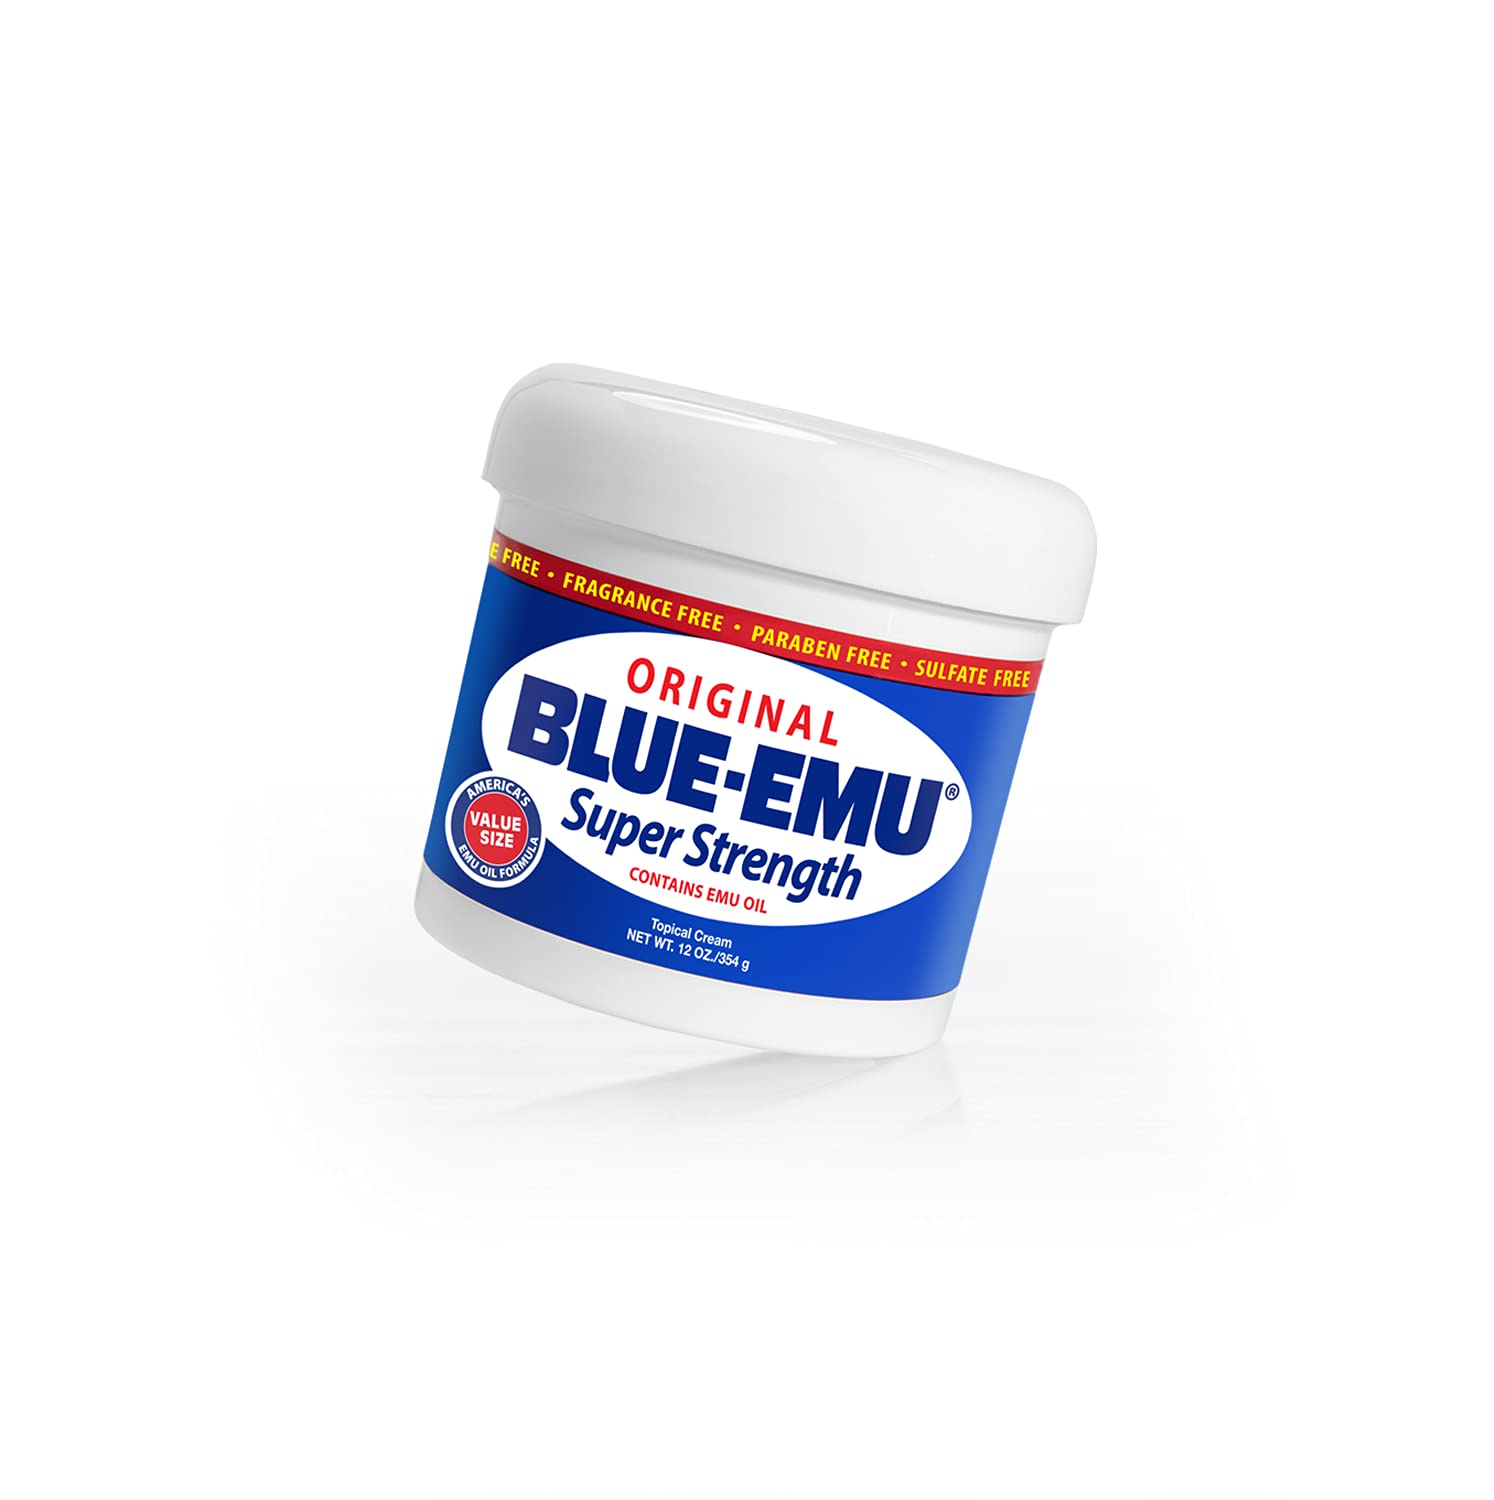 Blue Emu Muscle and Joint Deep Soothing Original Analgesic Cream, 1 Pack 12oz